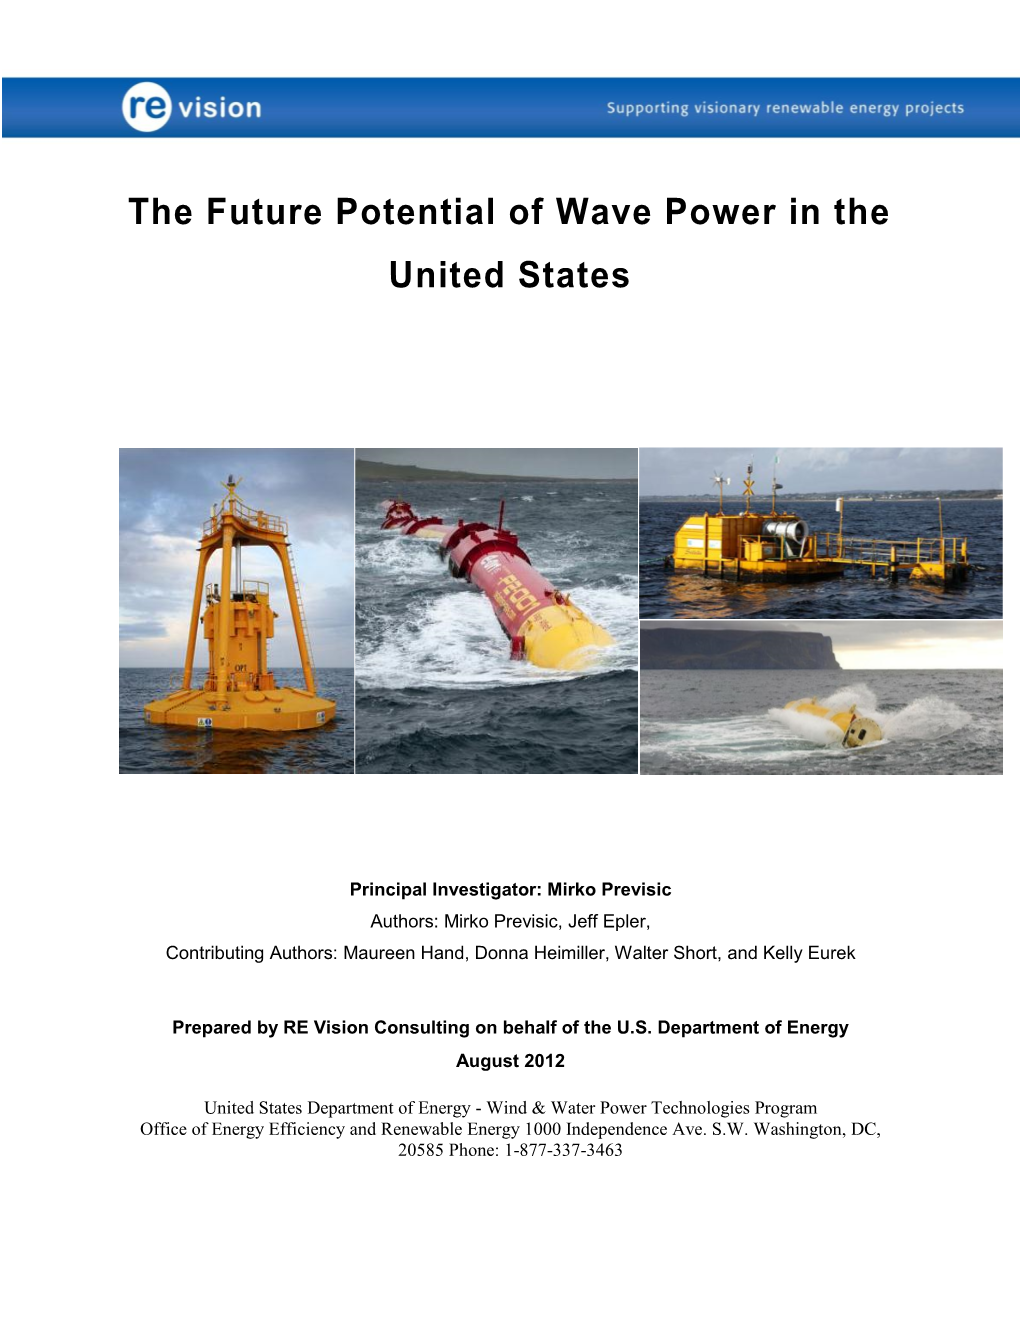 The Future of Wave Power in the United States